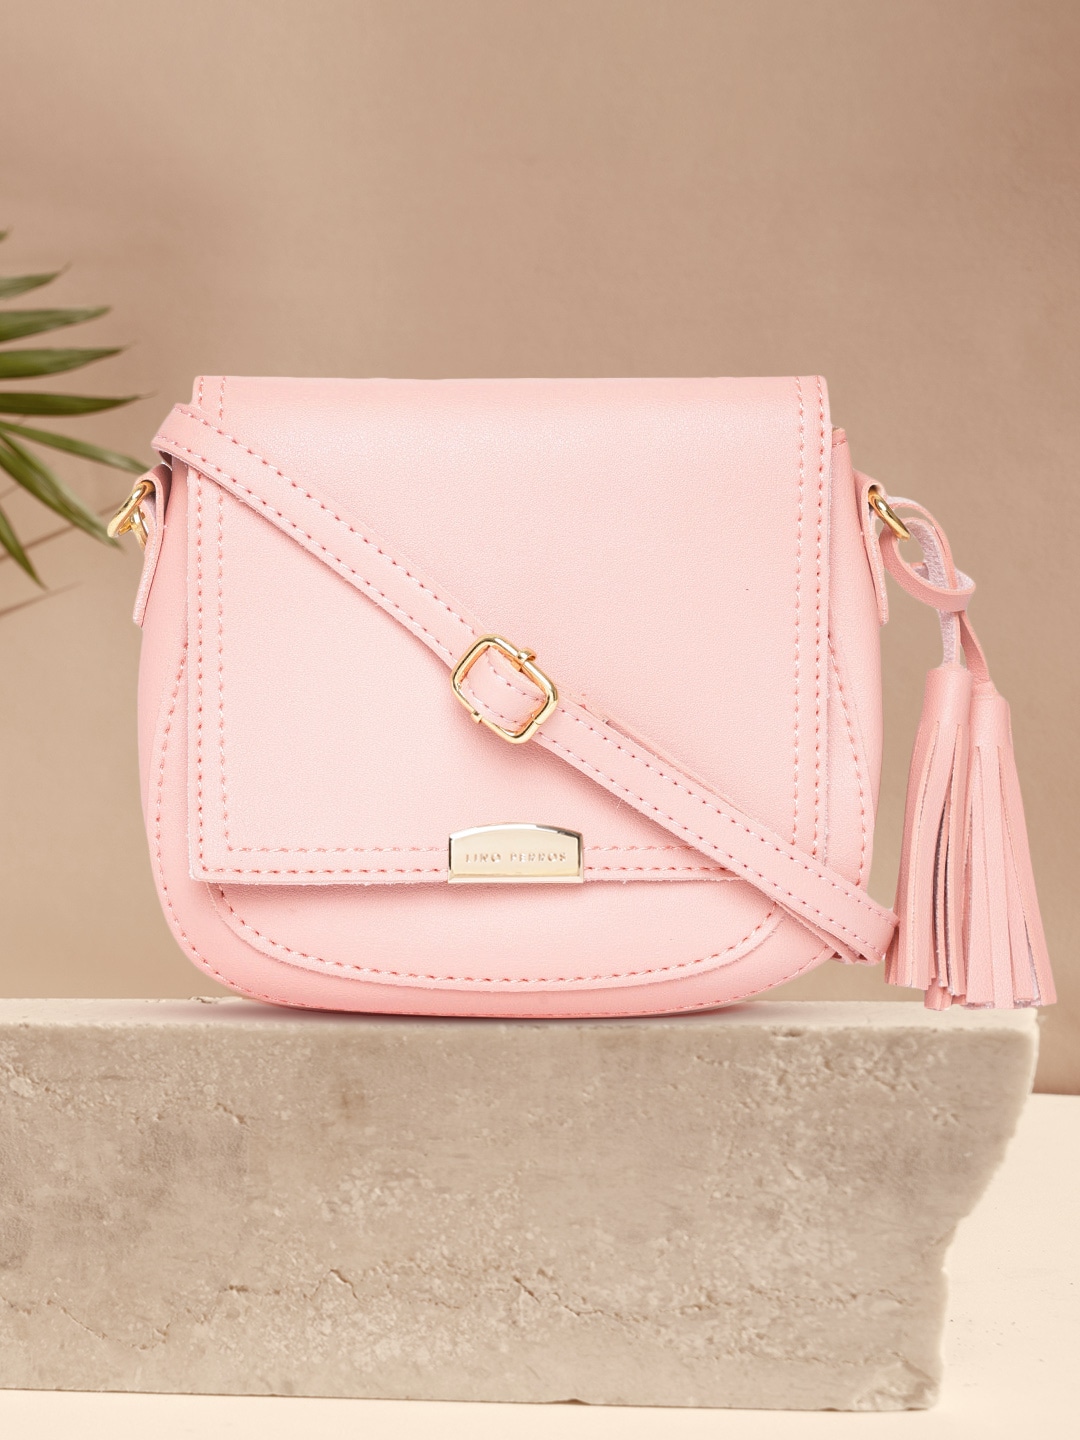 Lino Perros Pink Solid Sling Bag Price in India